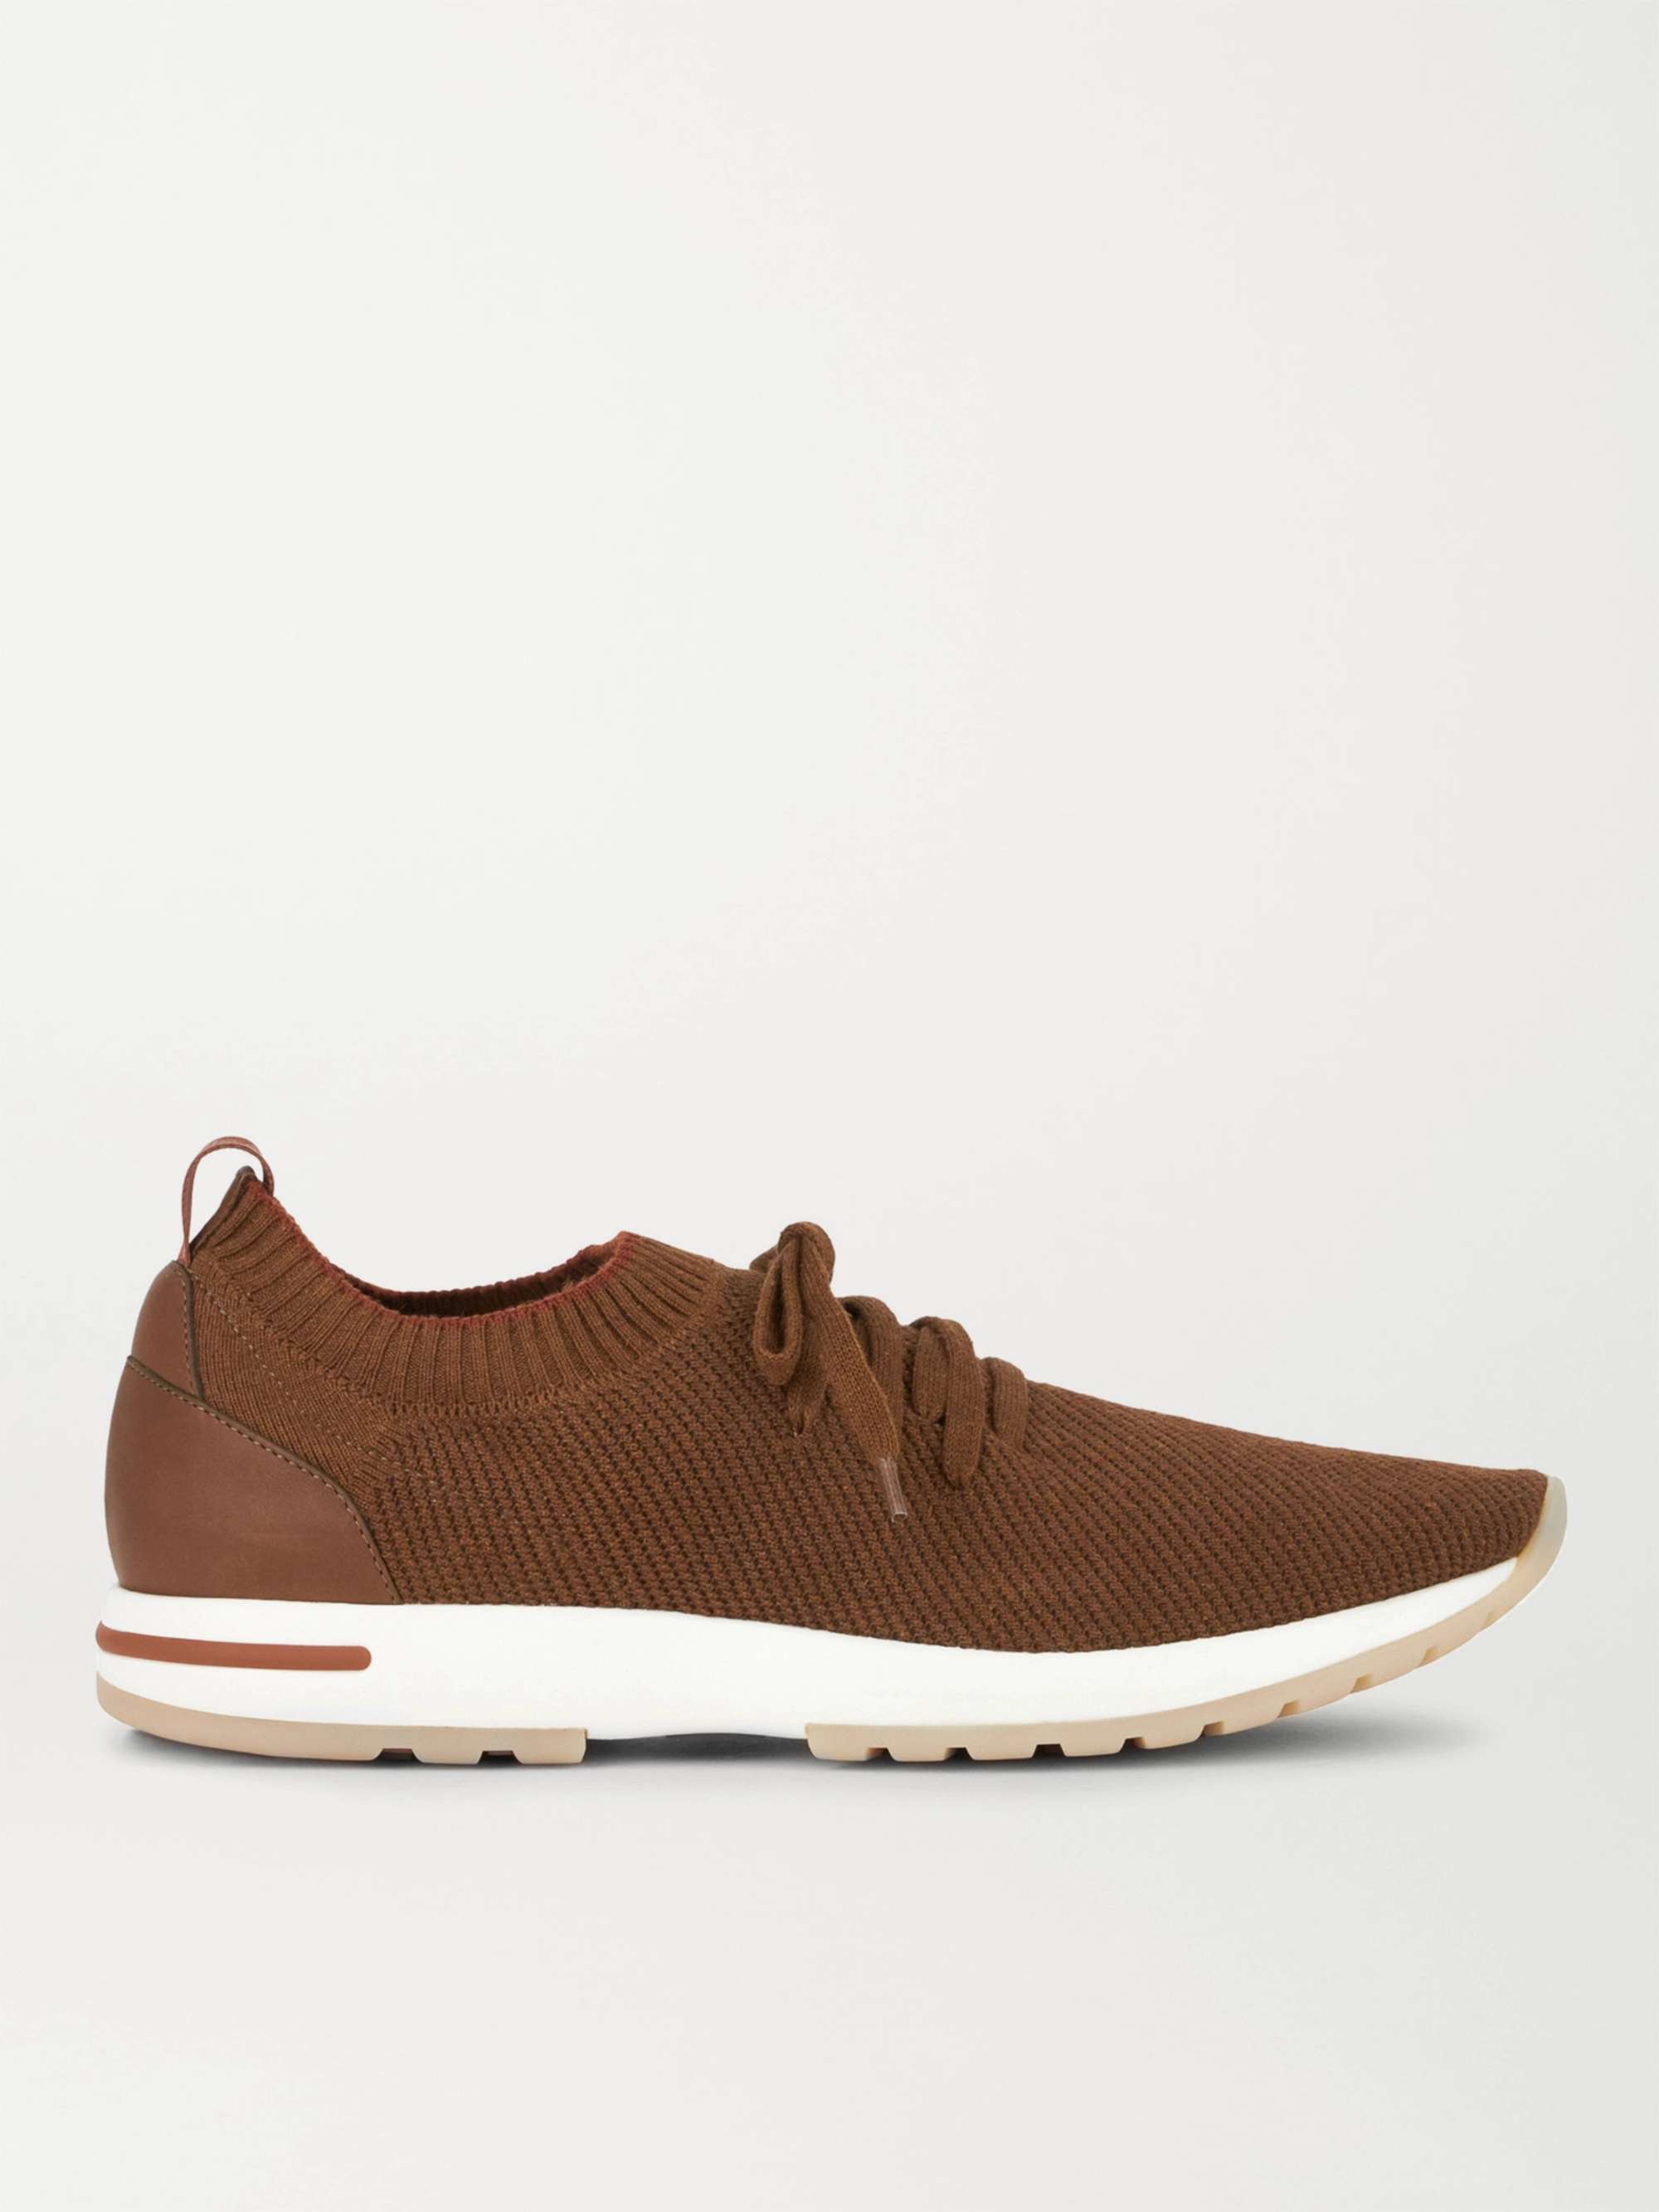 LORO PIANA 360 Flexy Walk Leather-Trimmed Knitted Silk and Linen-Blend  Sneakers | MR PORTER